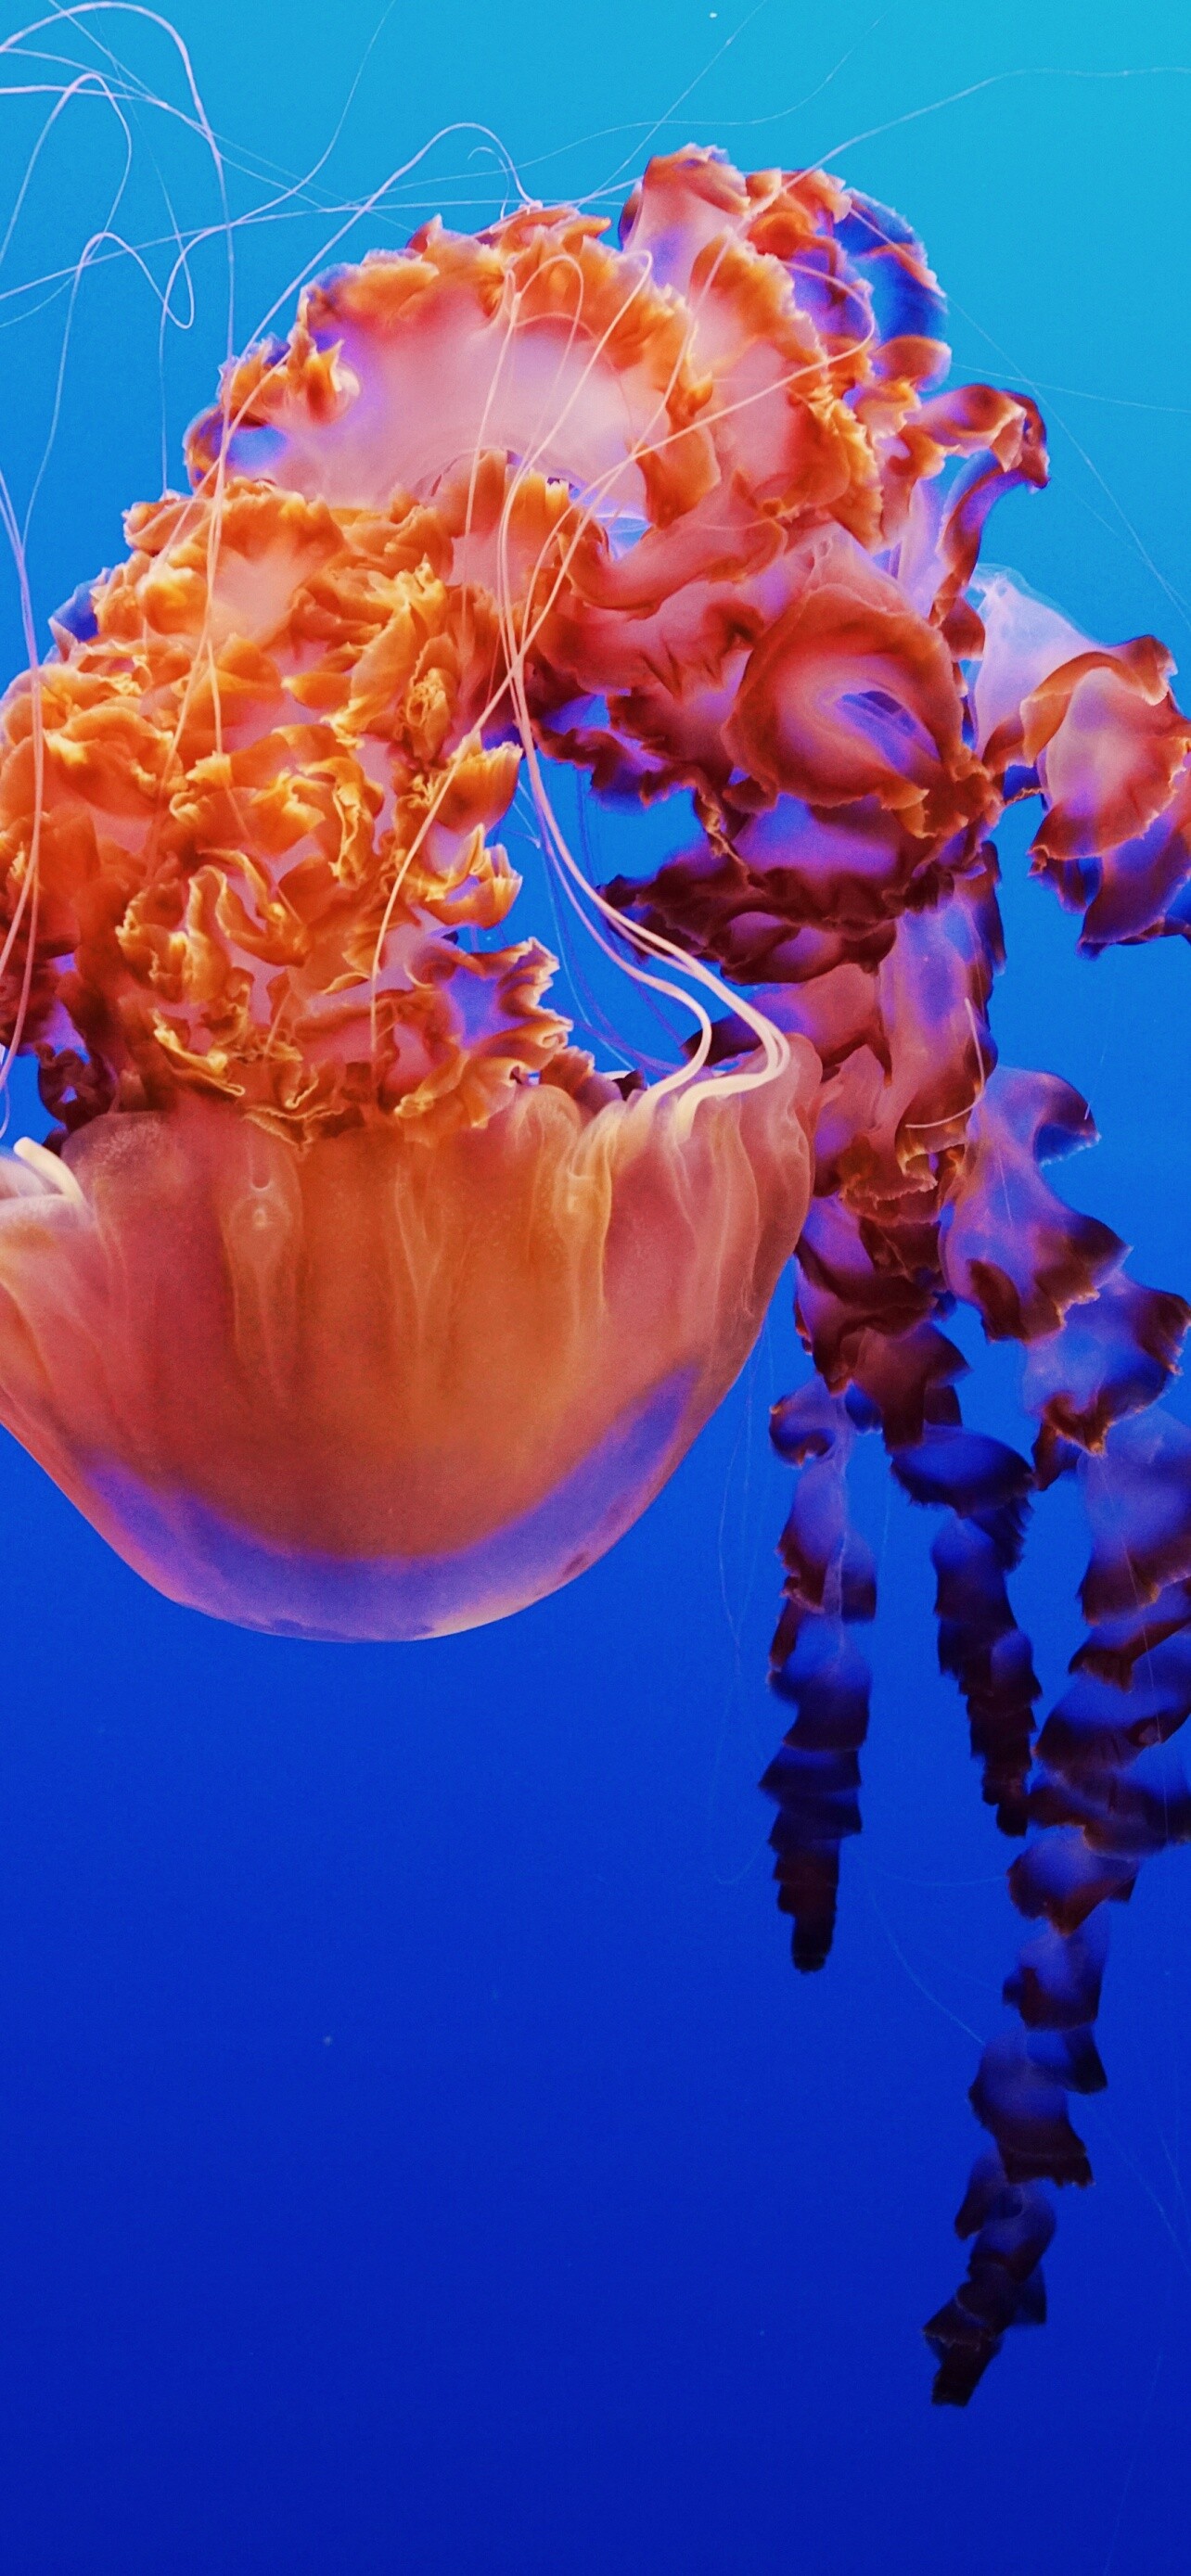 Glowing Jellyfish: Black Sea Nettle, One of the giant jellyfish species, Bells reaching over three feet. 1290x2780 HD Wallpaper.